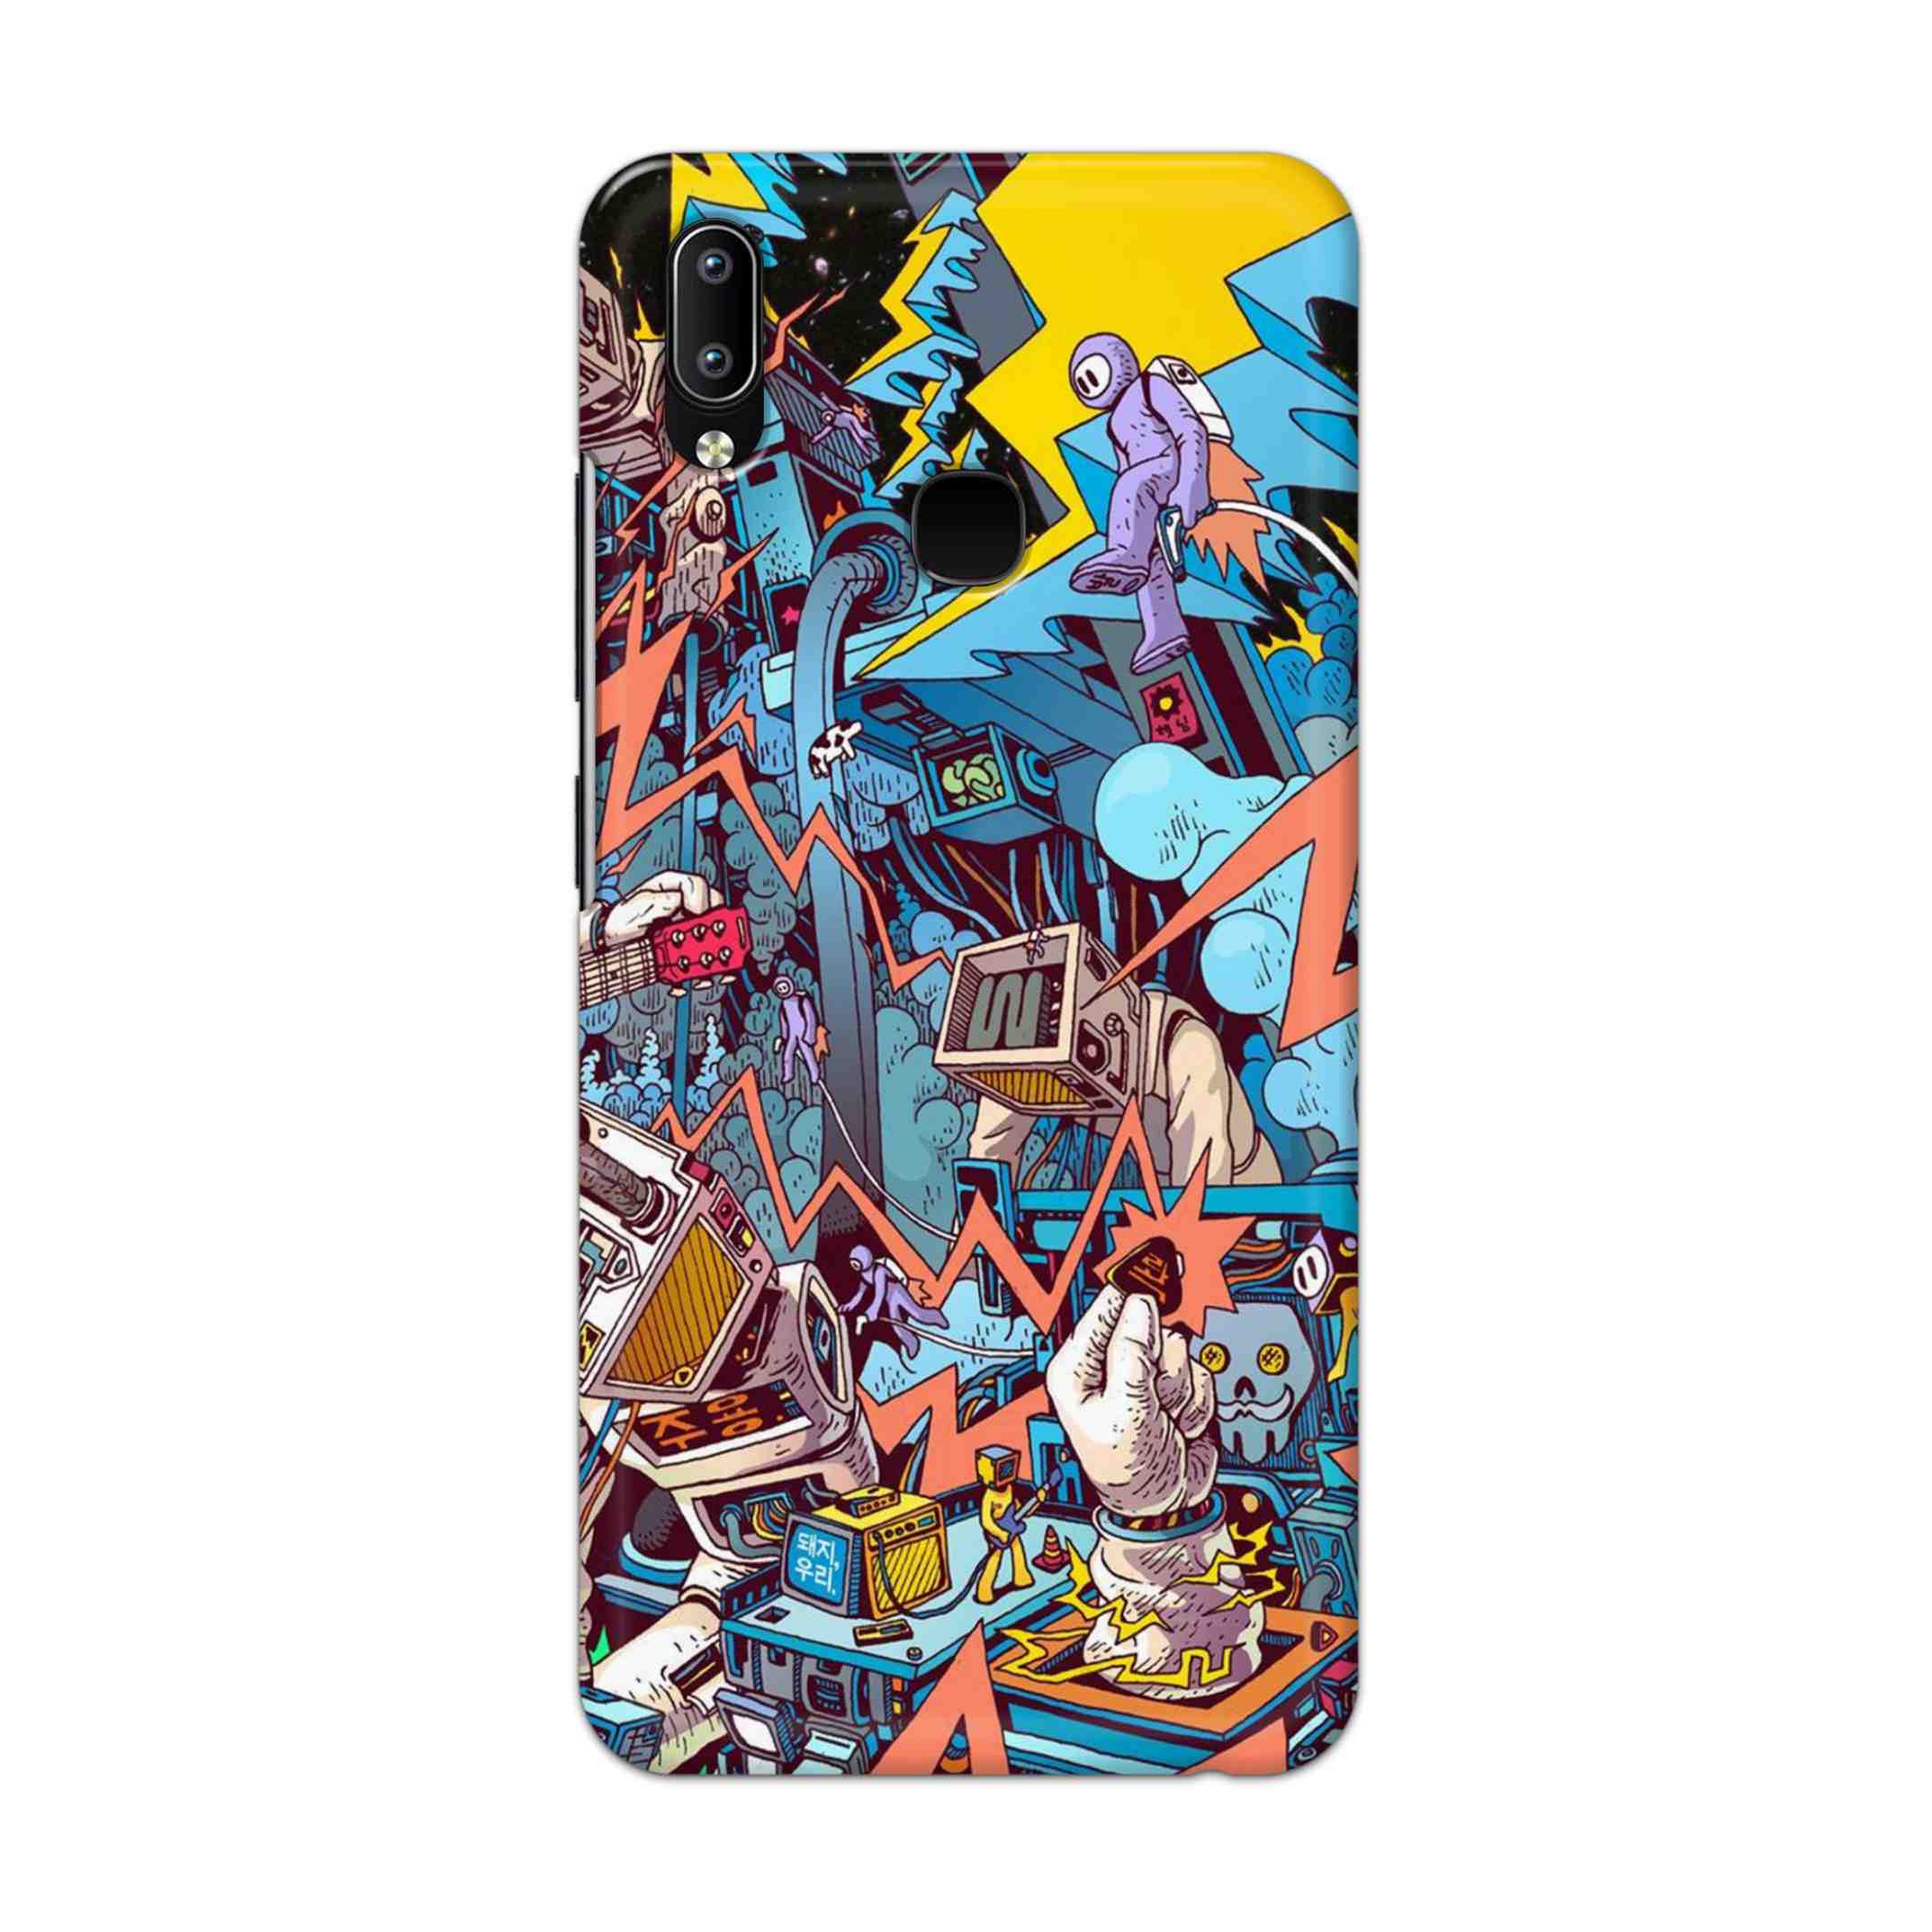 Buy Ofo Panic Hard Back Mobile Phone Case Cover For Vivo Y95 / Y93 / Y91 Online